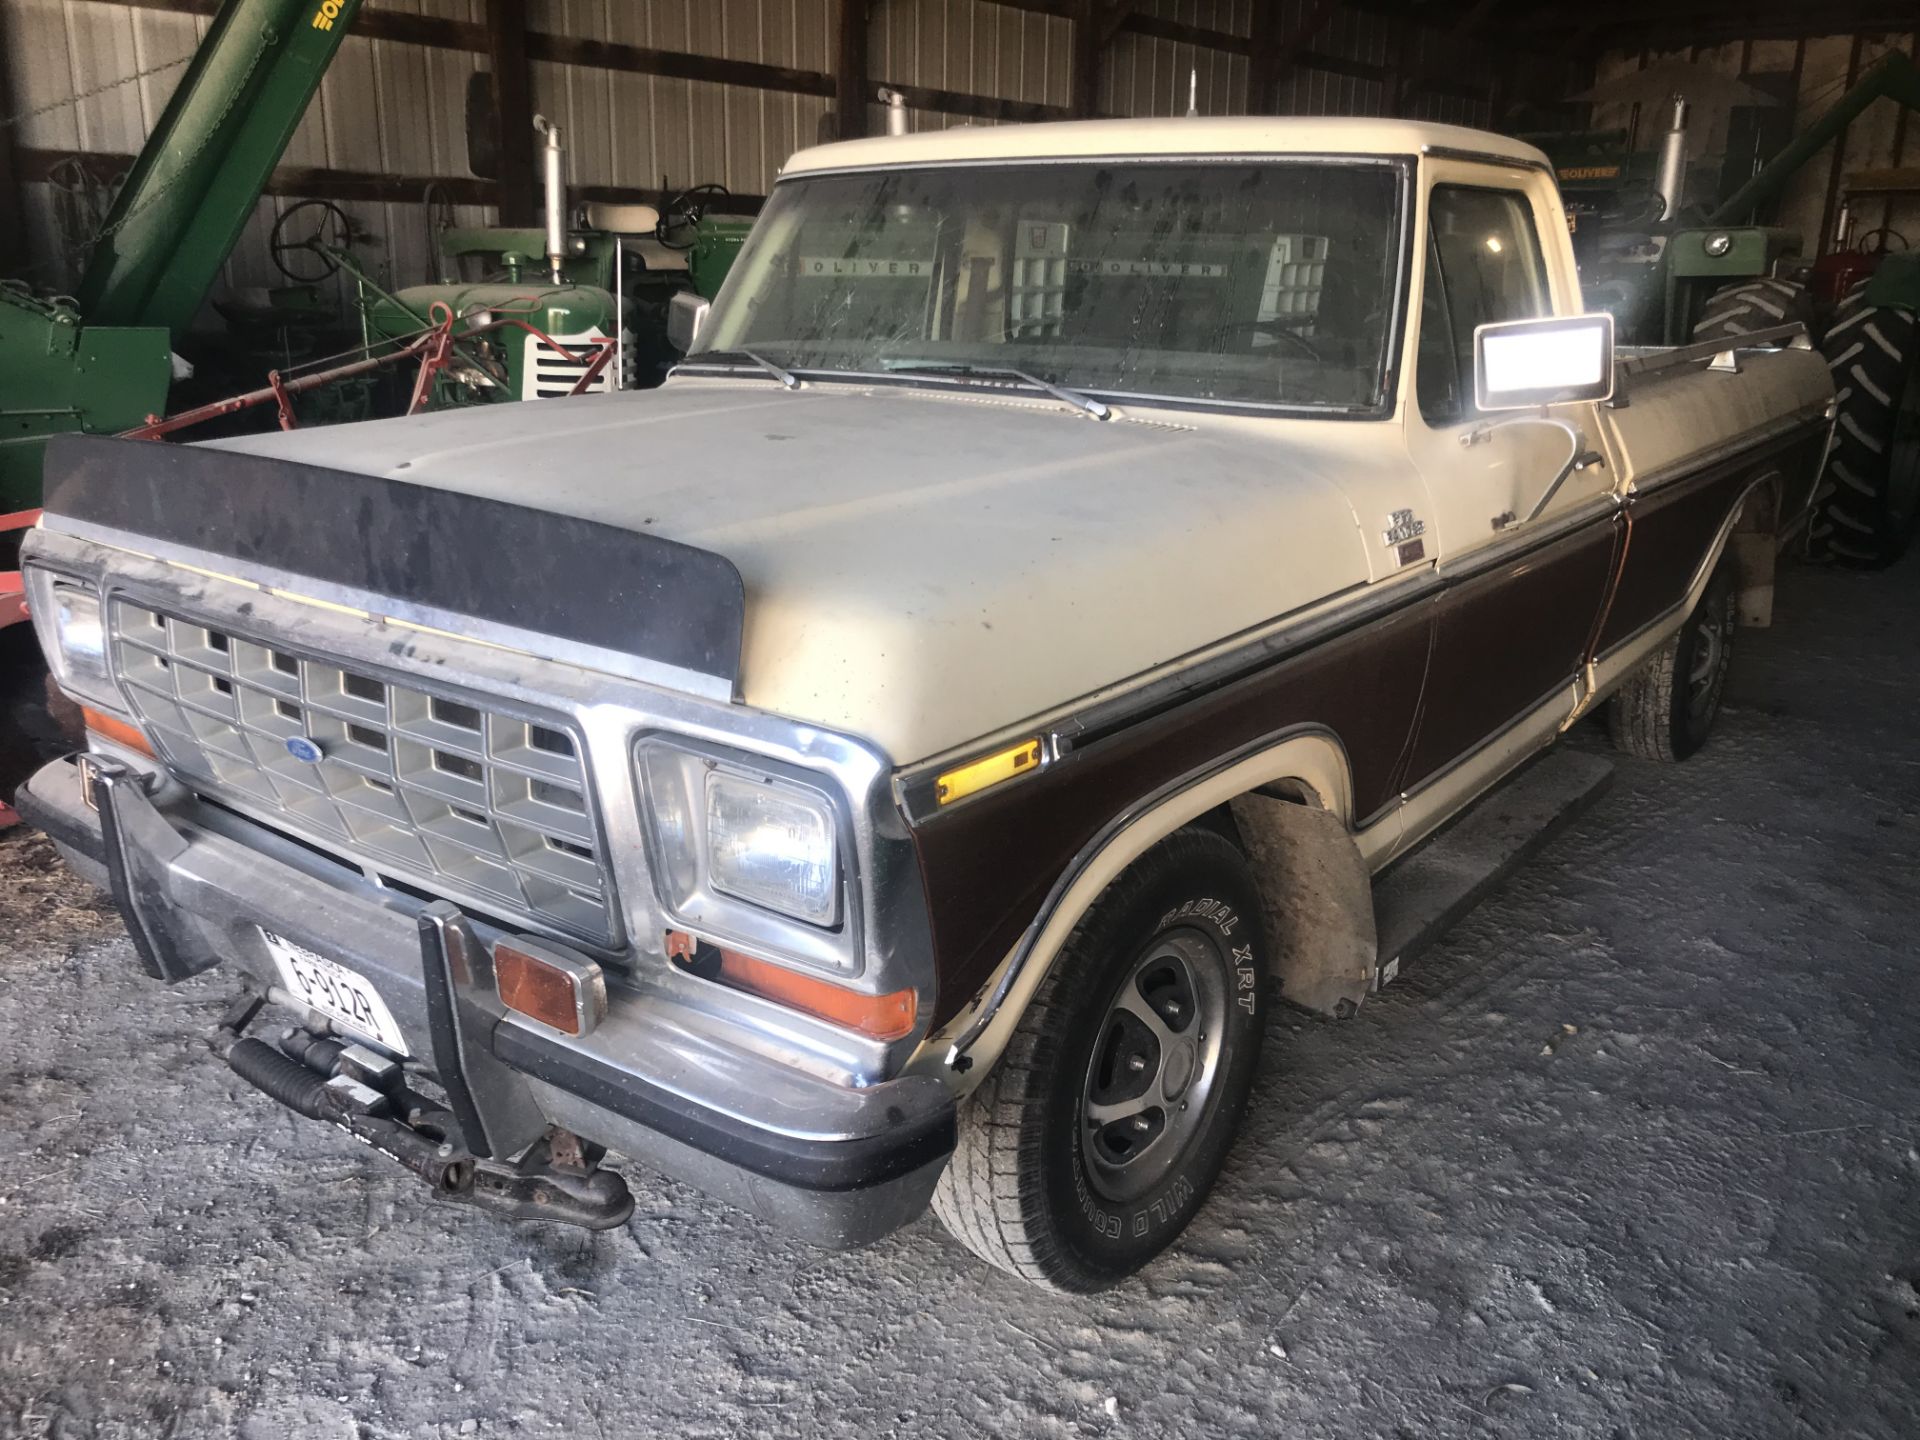 1978 Ford Lariat F-150 2wd, 400 V-8, C7Auto, Posi, AC, Air Comp, LP/Gas (one owner) - Image 2 of 4